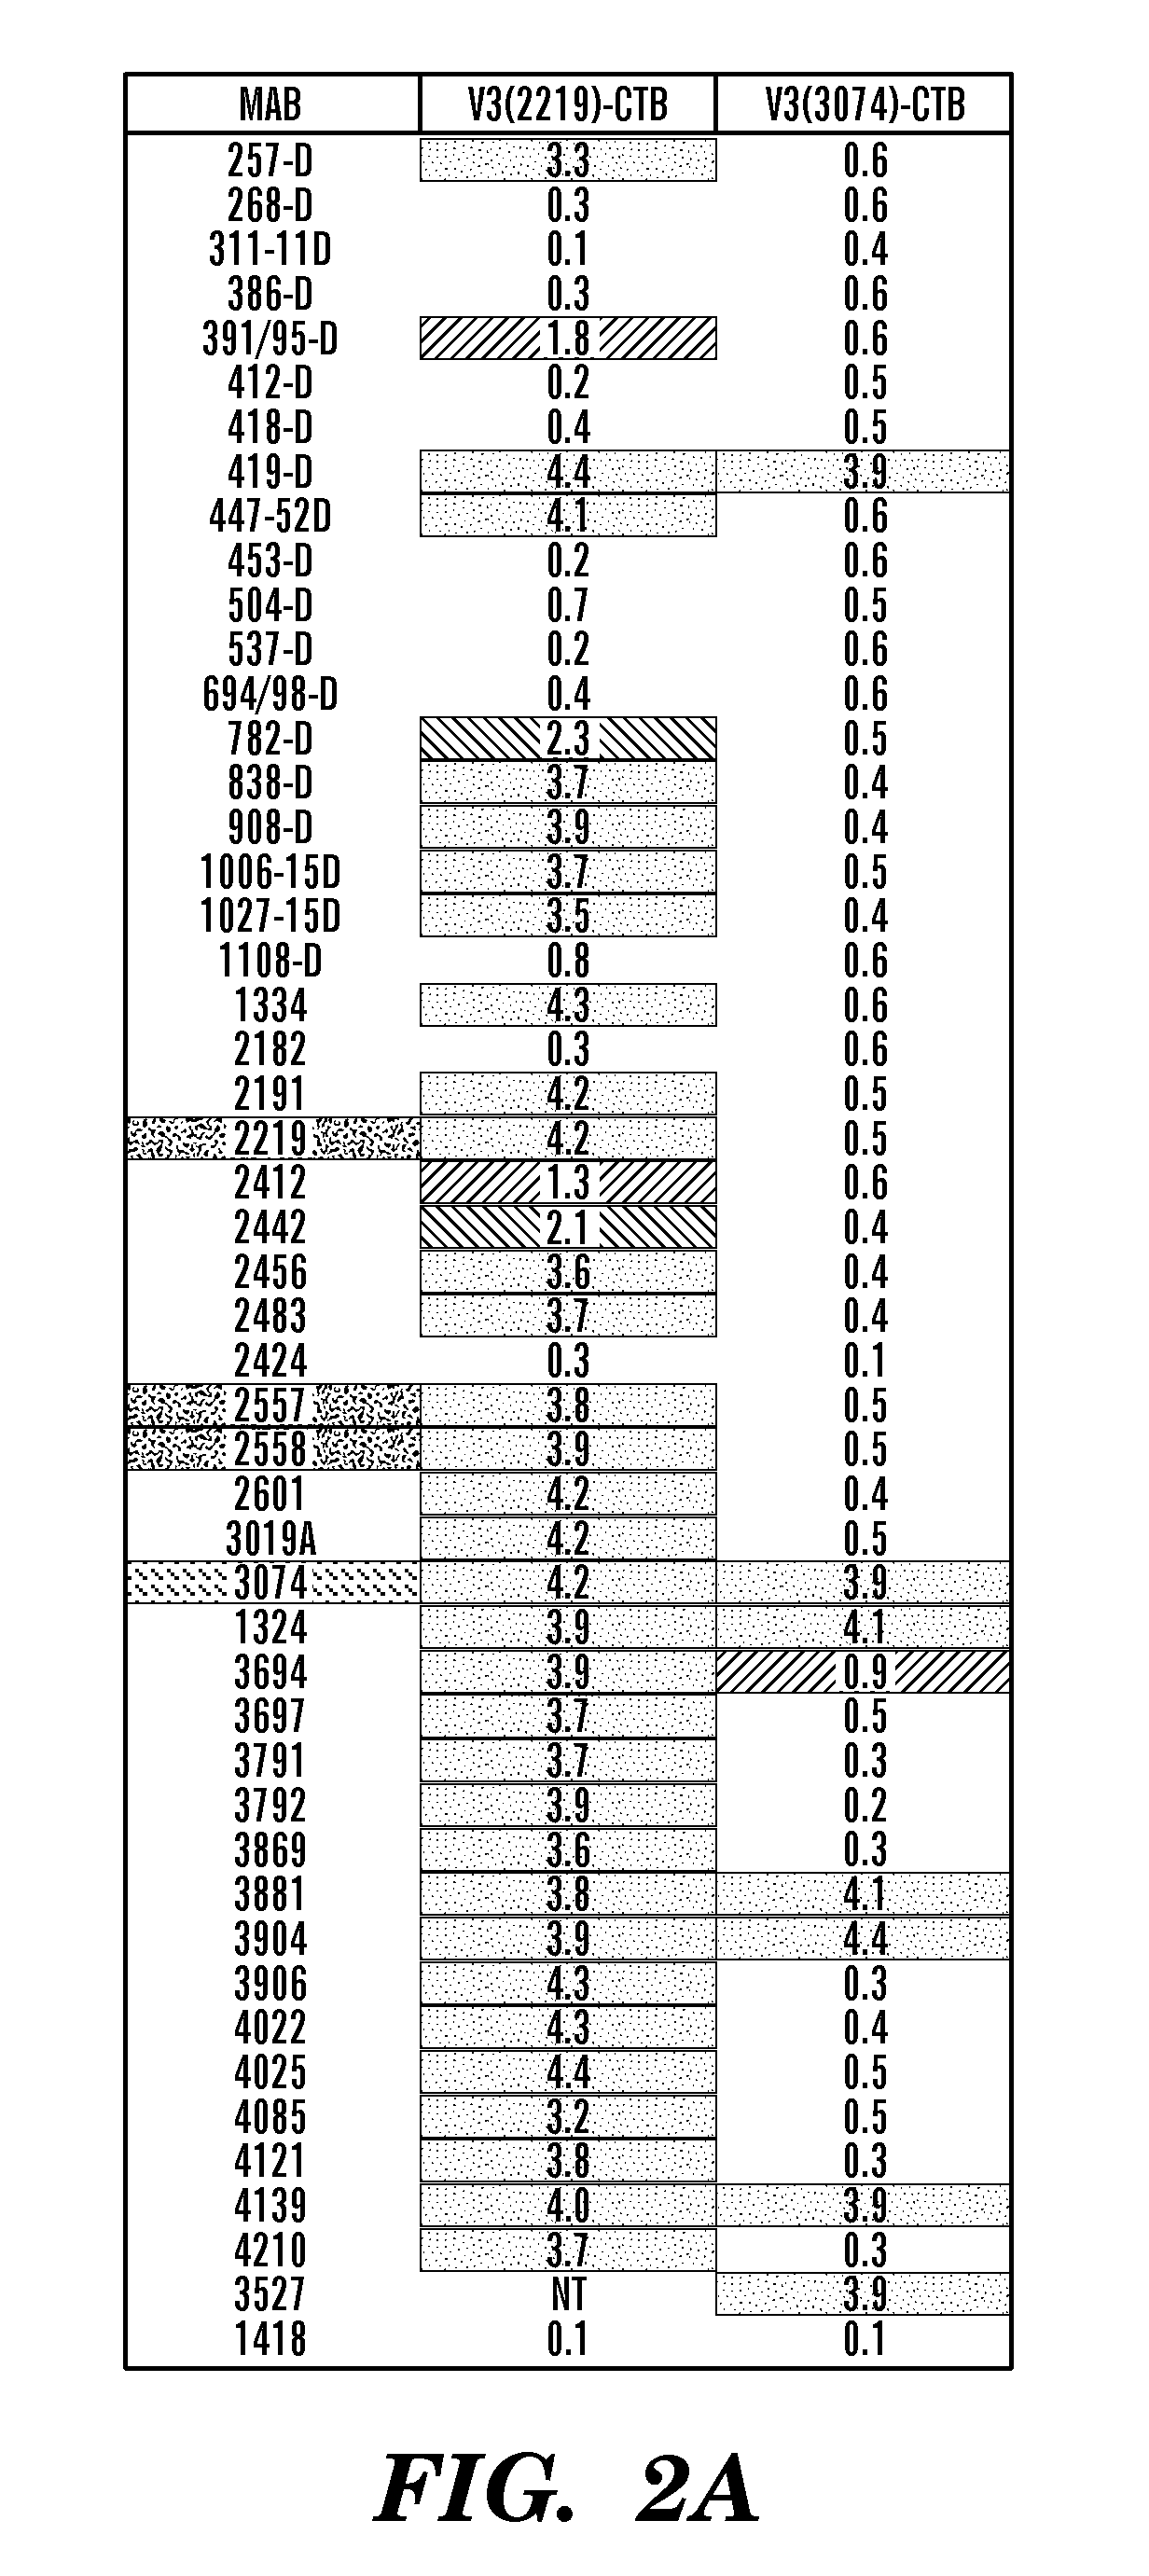 Immunogenic polypeptides comprising a modified loop peptide presenting the HIV-1 GP120 3074 mAb epitope and scaffold proteins containing said peptide